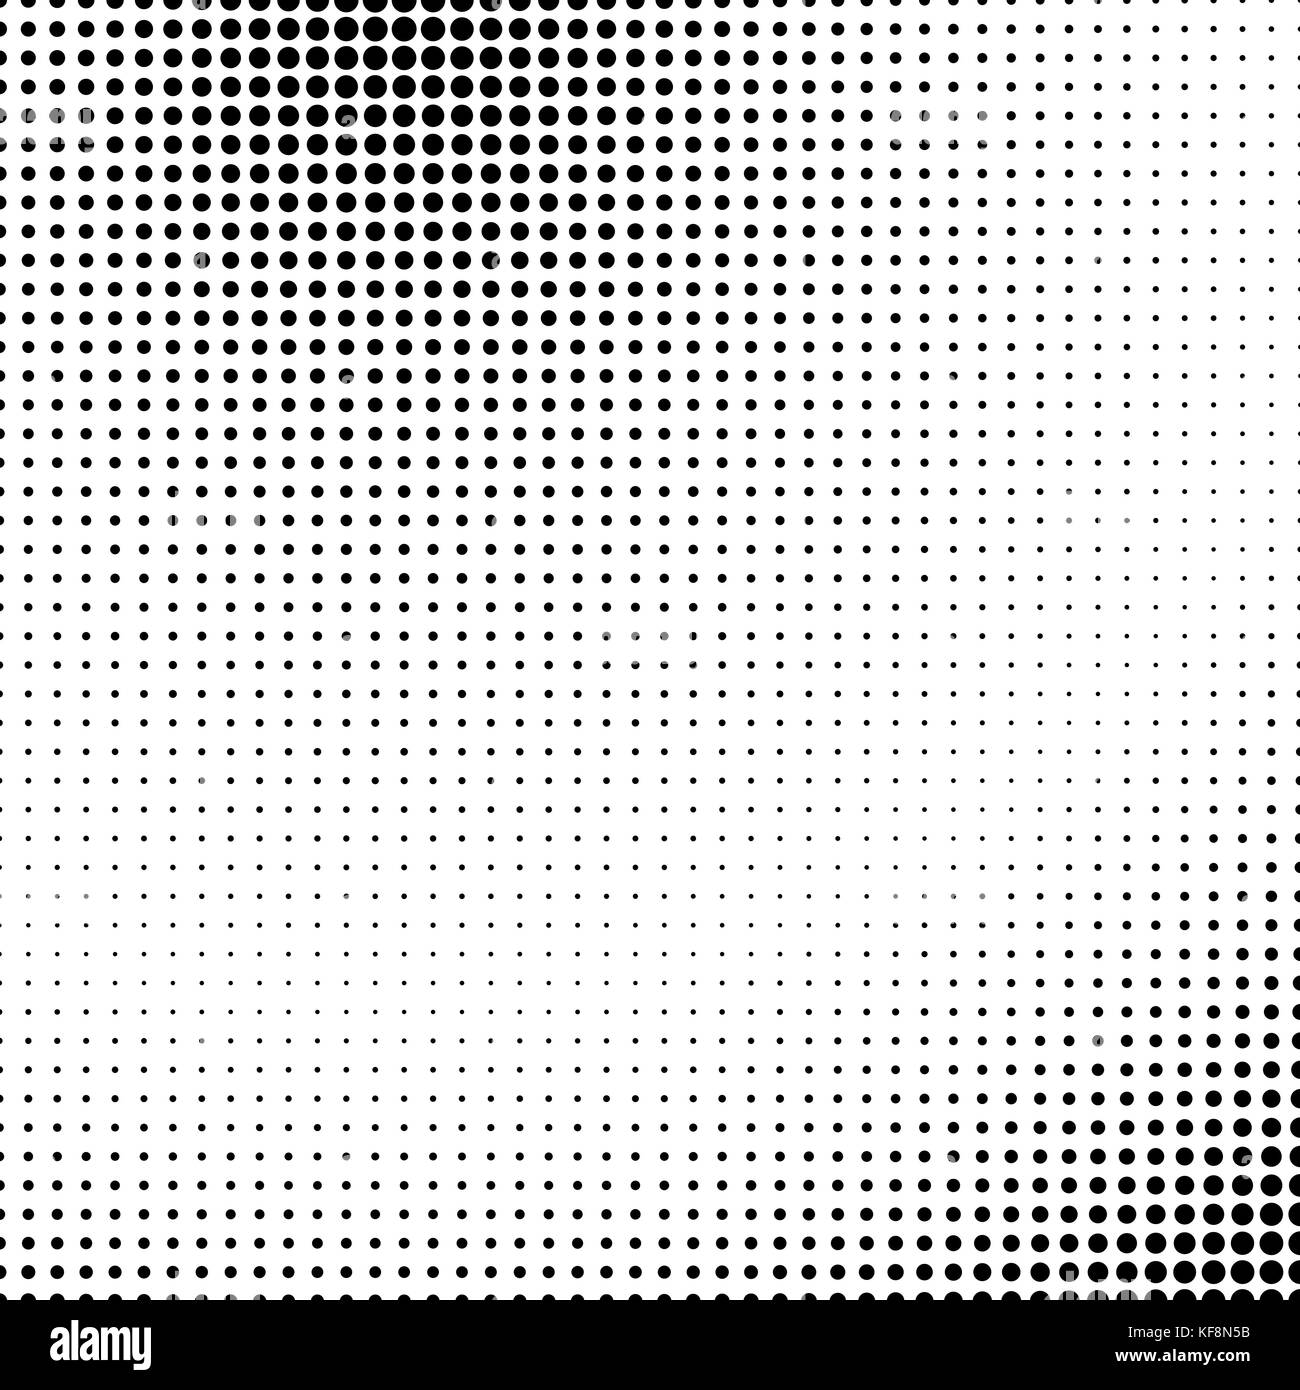 Vector abstract dotted halftone template background. Pop art dotted gradient design element. Grunge halftone textured pattern with dots. Stock Vector